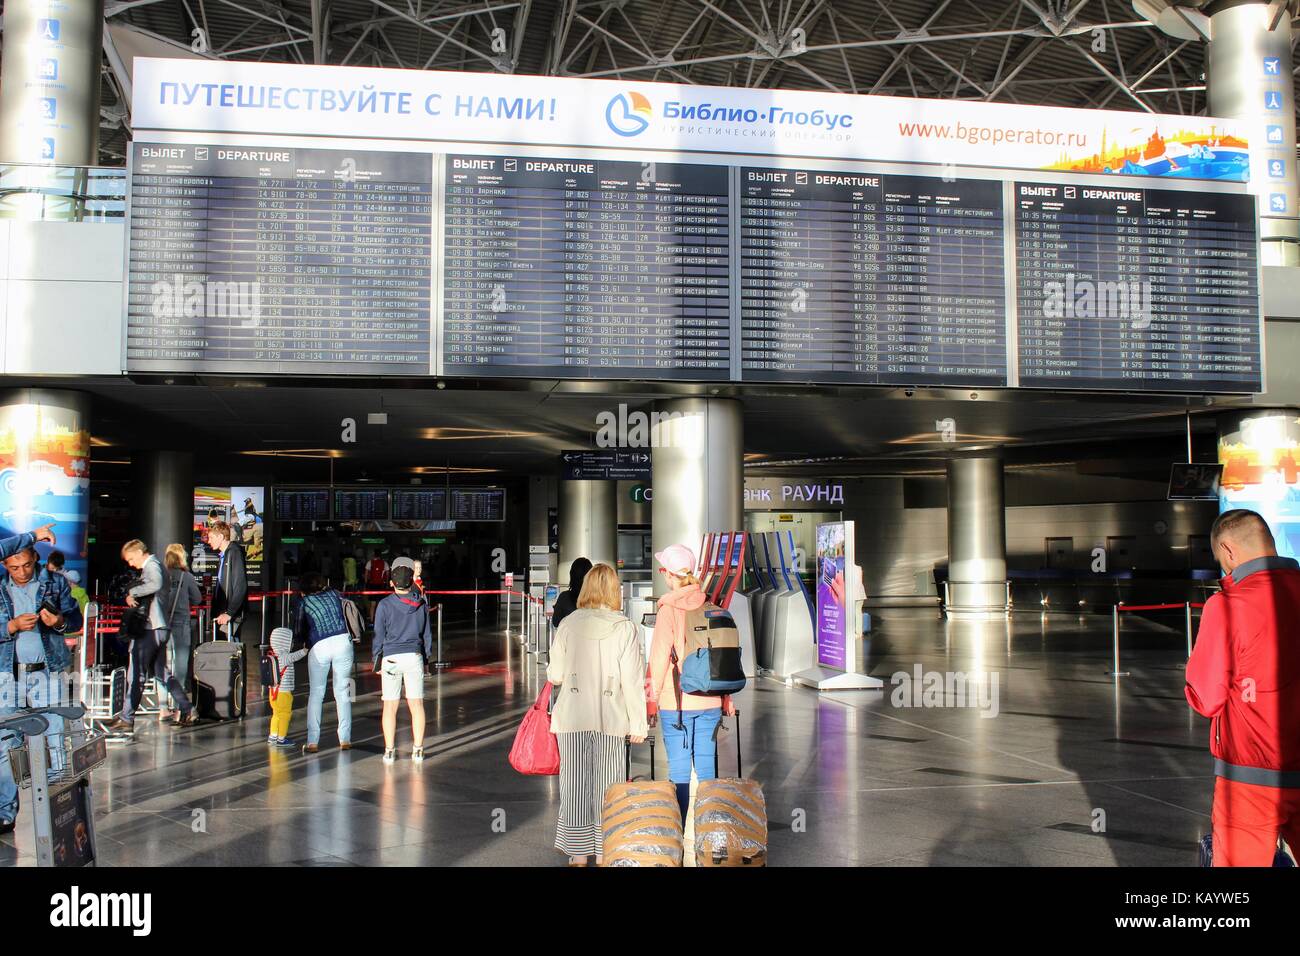 The main board with the flight schedule at the international airport Vnukovo (Moscow) - July 2017. Stock Photo